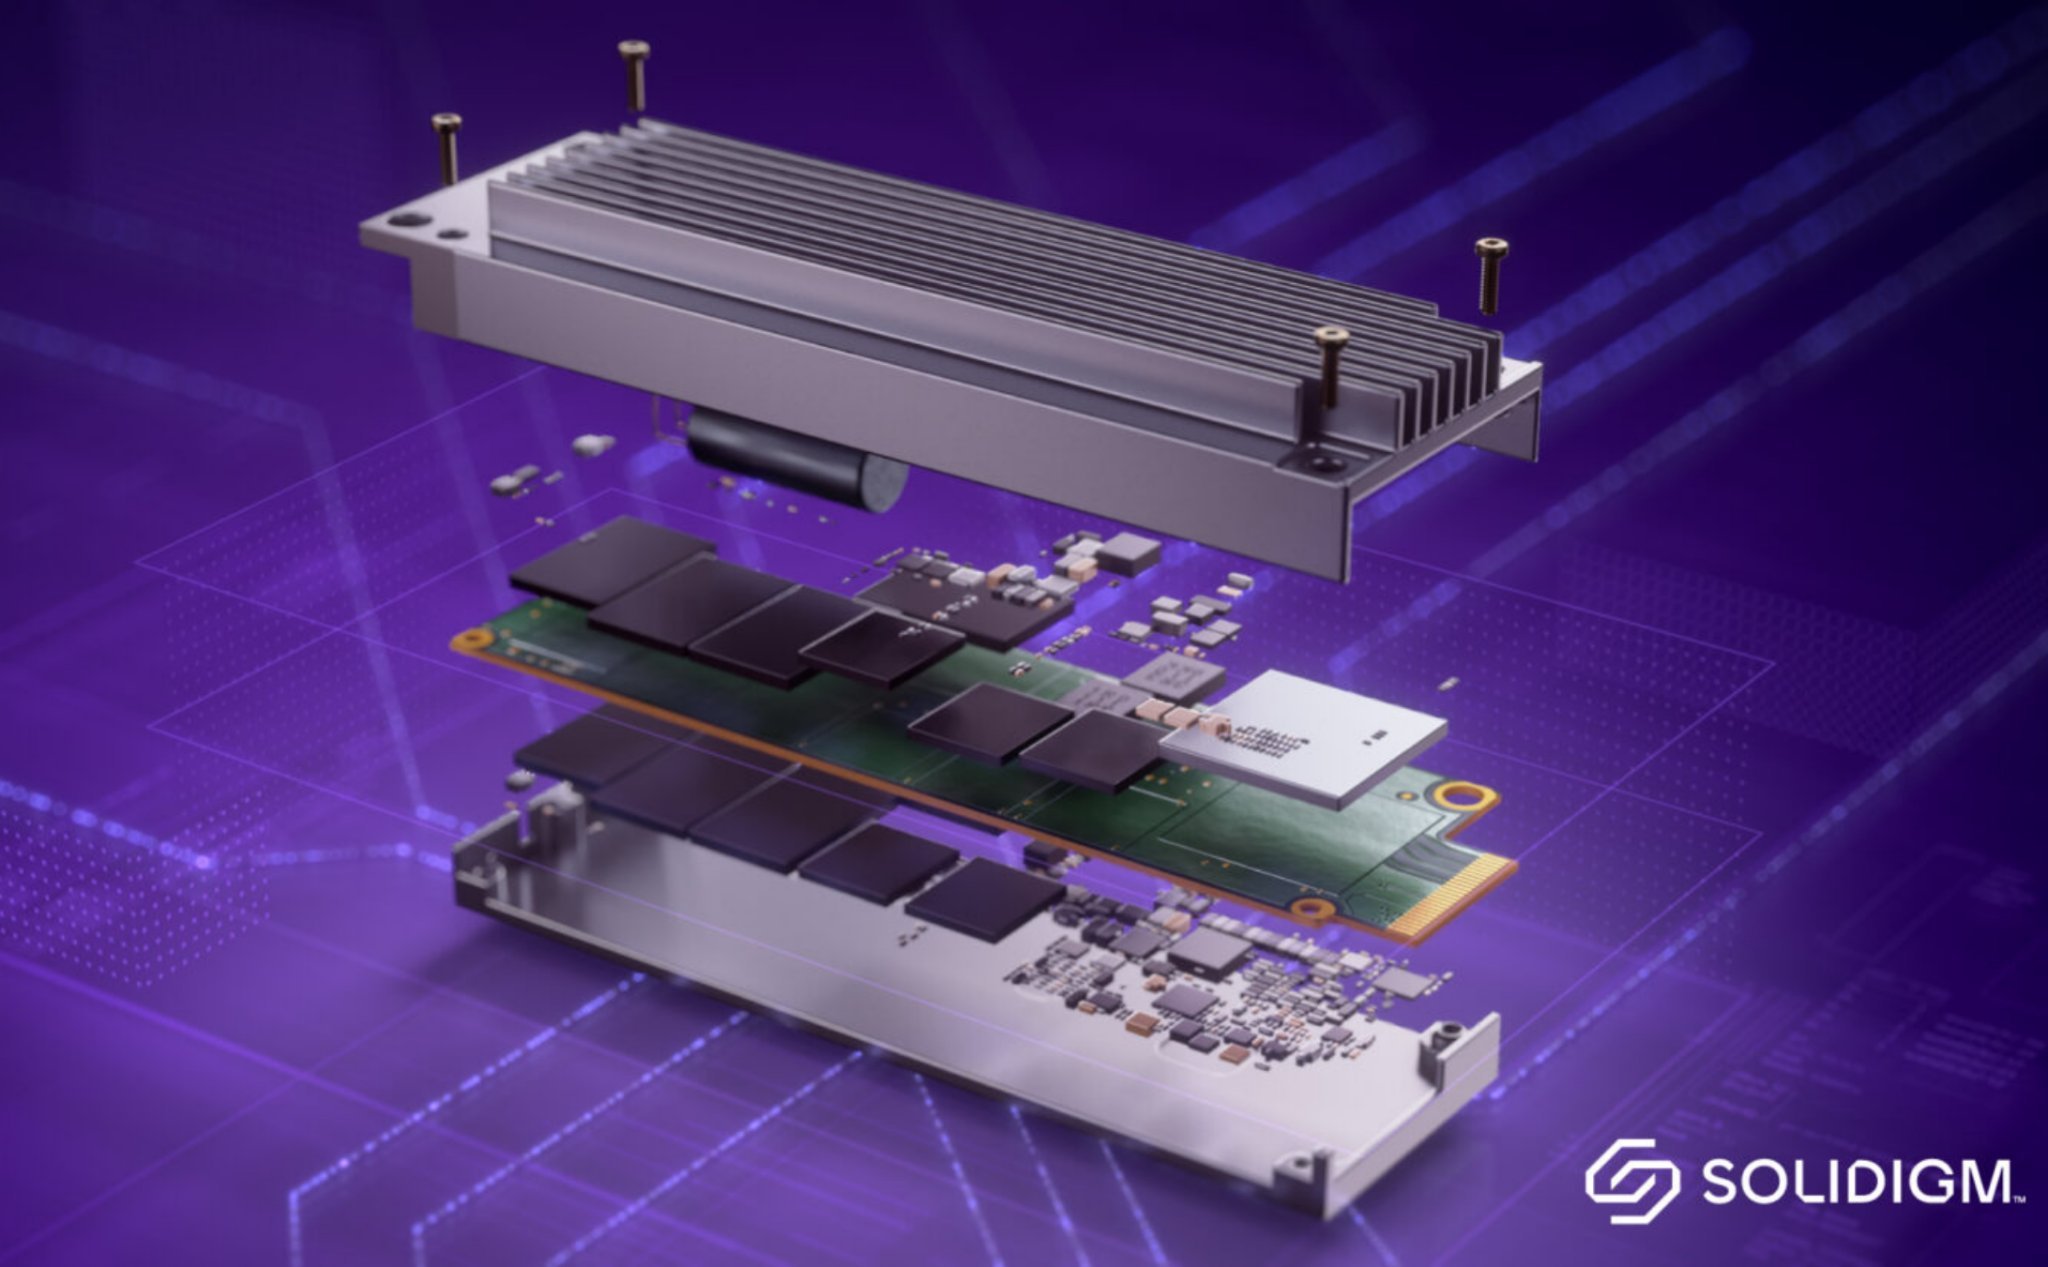 Solidigm announces NAND PLC - 5-bit/cell storage, SSDs will get cheaper and cheaper